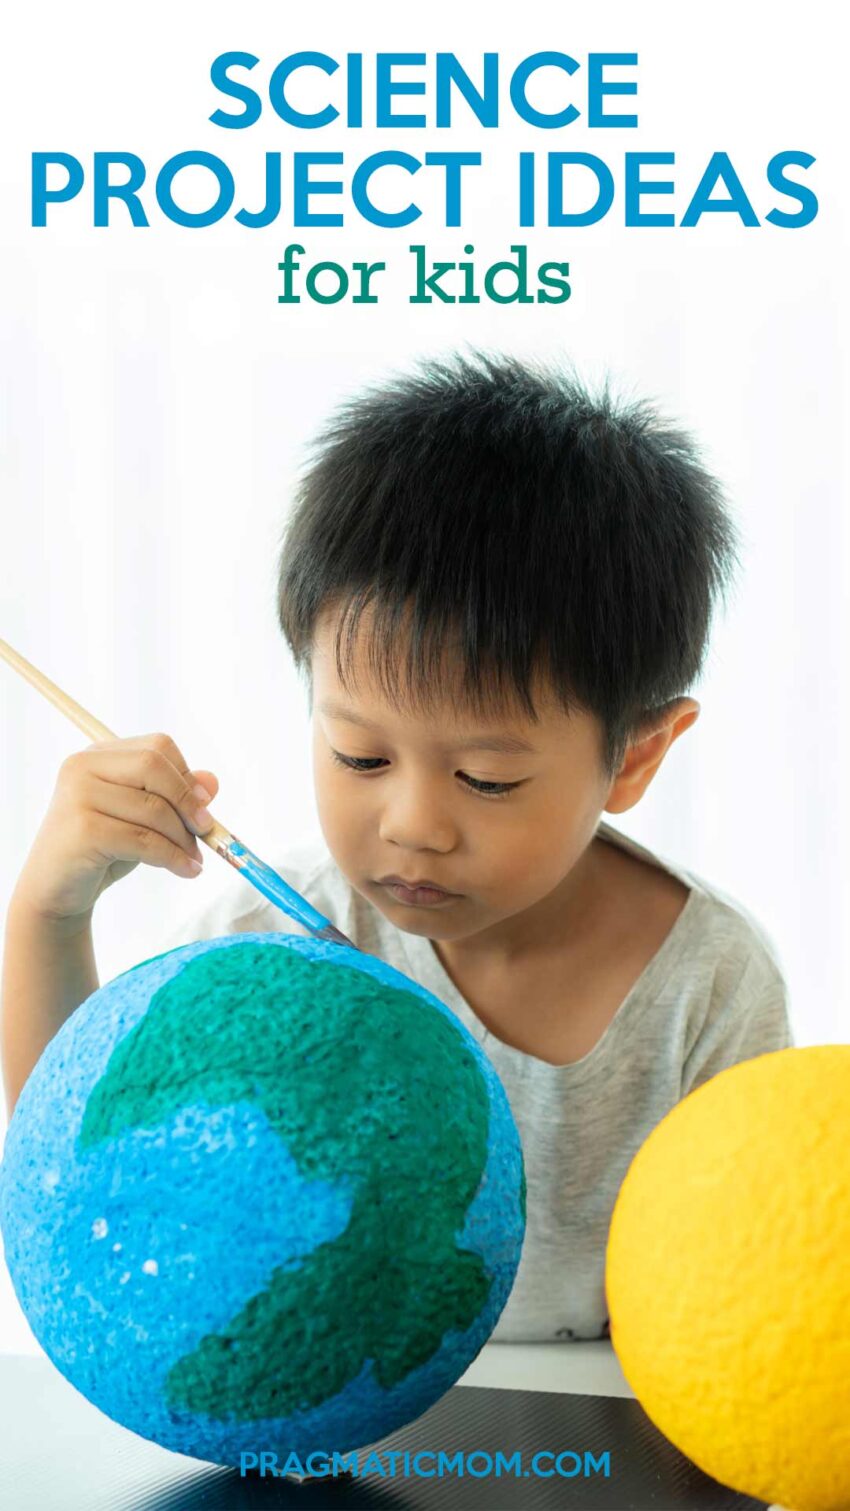 Science Project Ideas for Kids